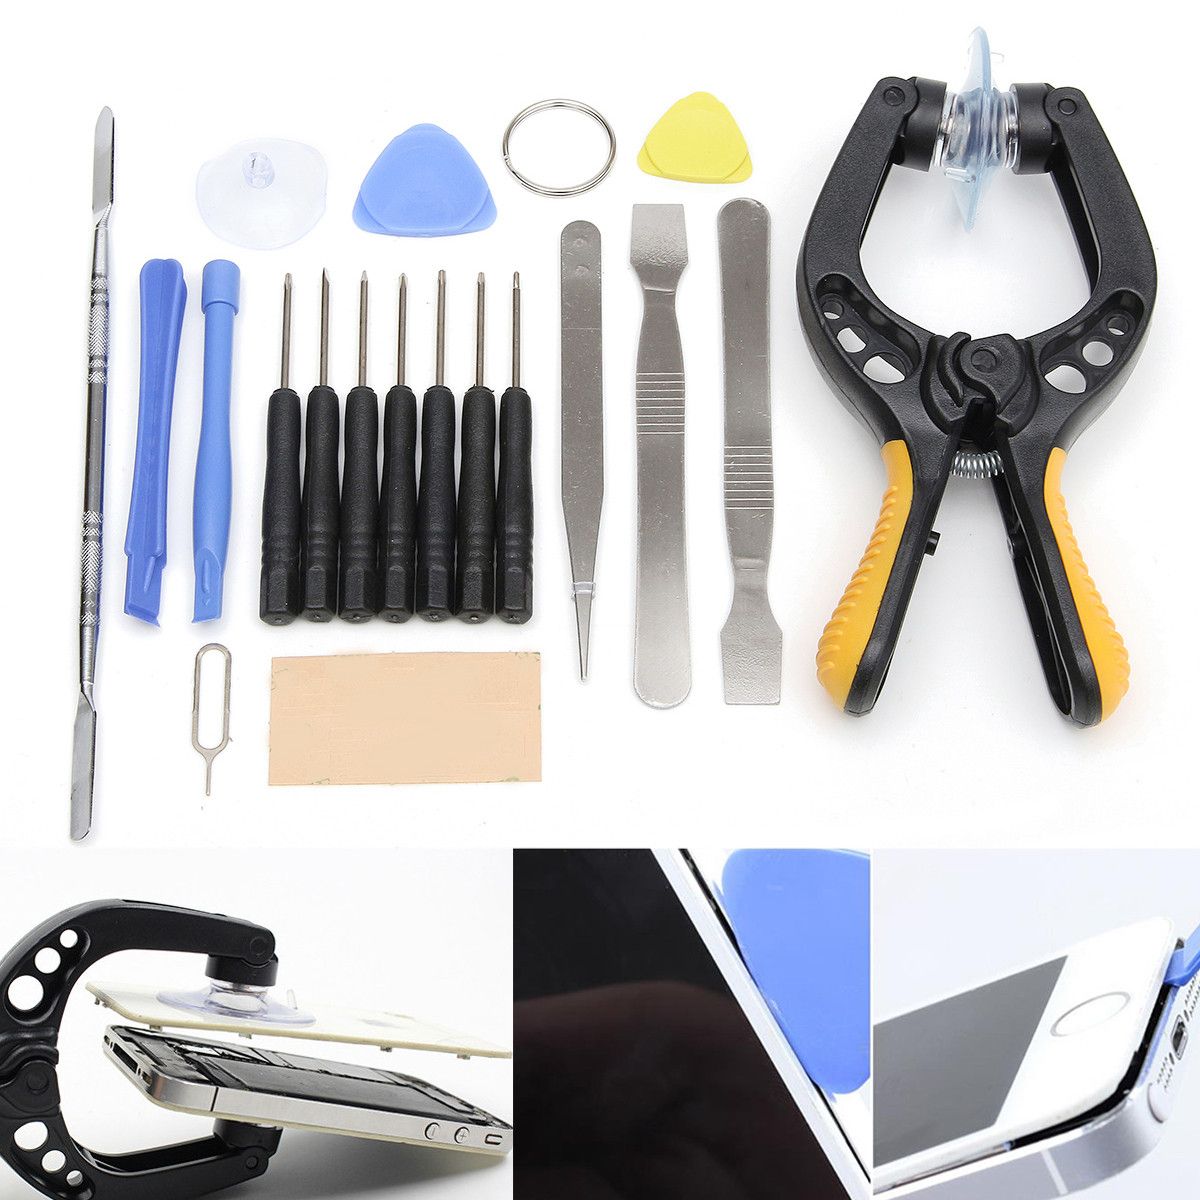 19-in-1-Phone-LCD-Screen-Opening-Tool-Plier-Suction-Cup-Pry-Spudger-Repair-Kit-Set-1114872